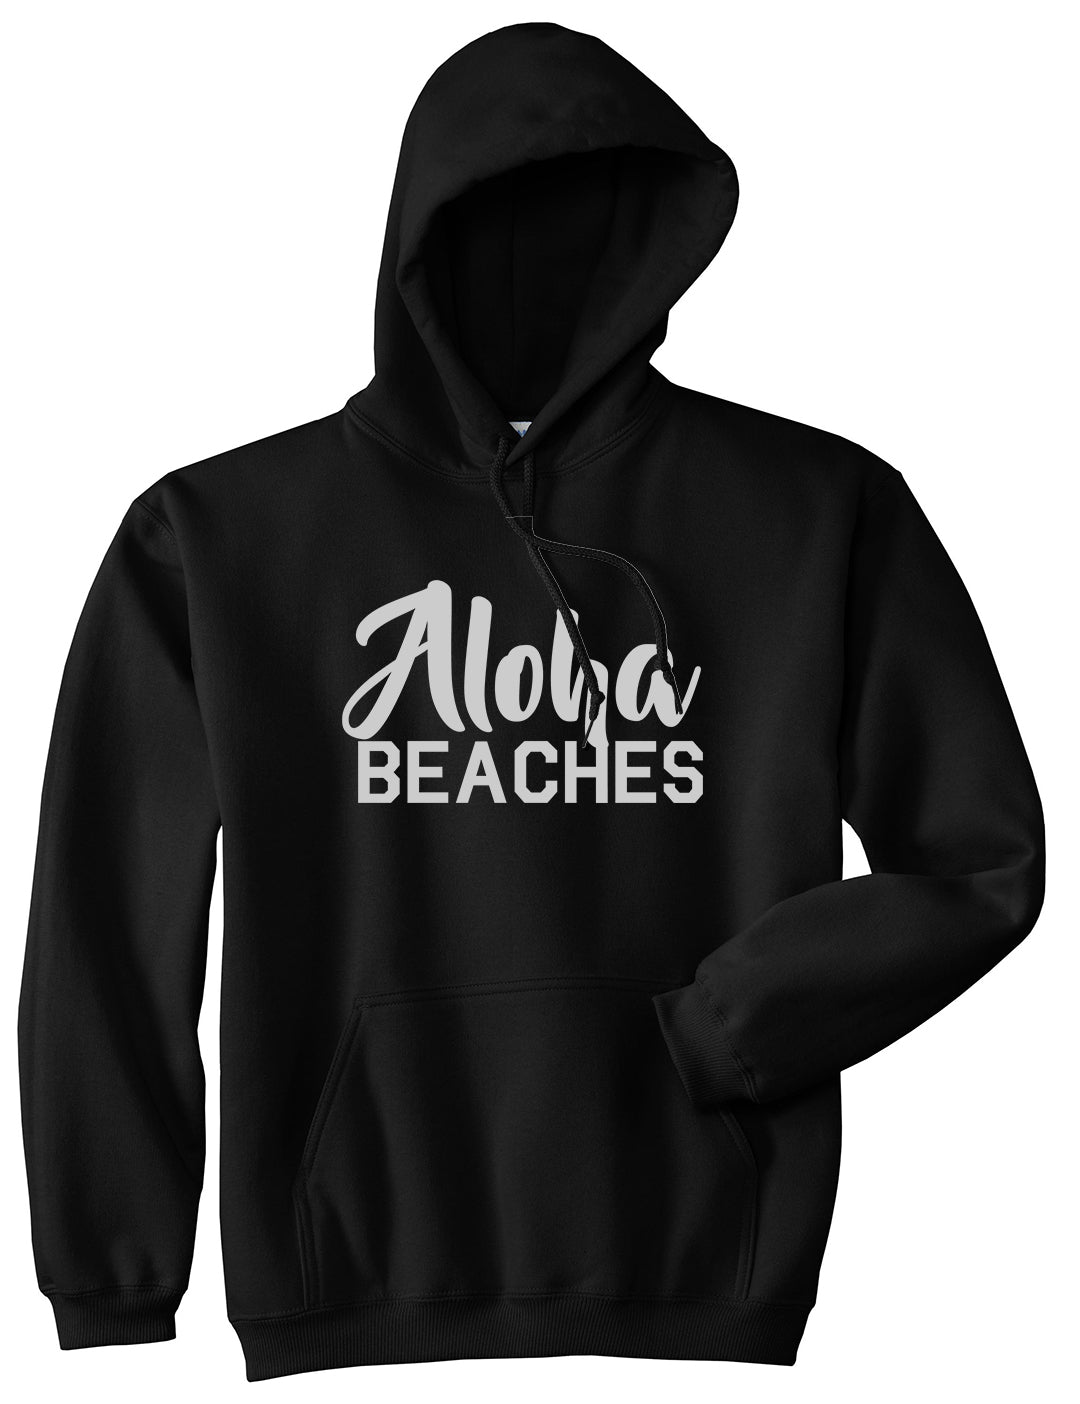 Aloha Beaches Black Pullover Hoodie by Kings Of NY